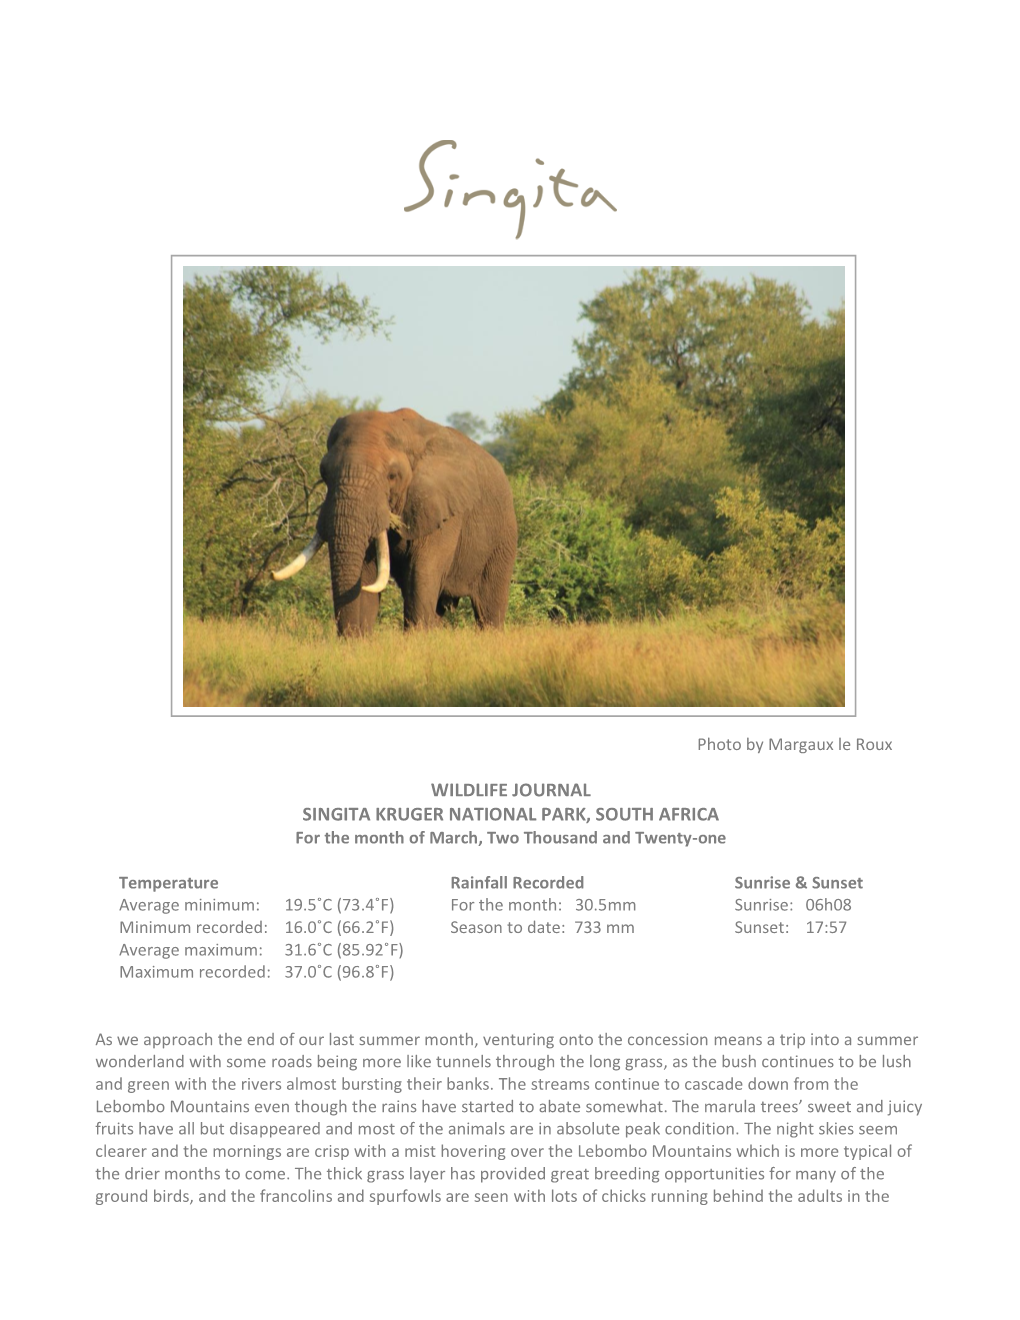 WILDLIFE JOURNAL SINGITA KRUGER NATIONAL PARK, SOUTH AFRICA for the Month of March, Two Thousand and Twenty-One